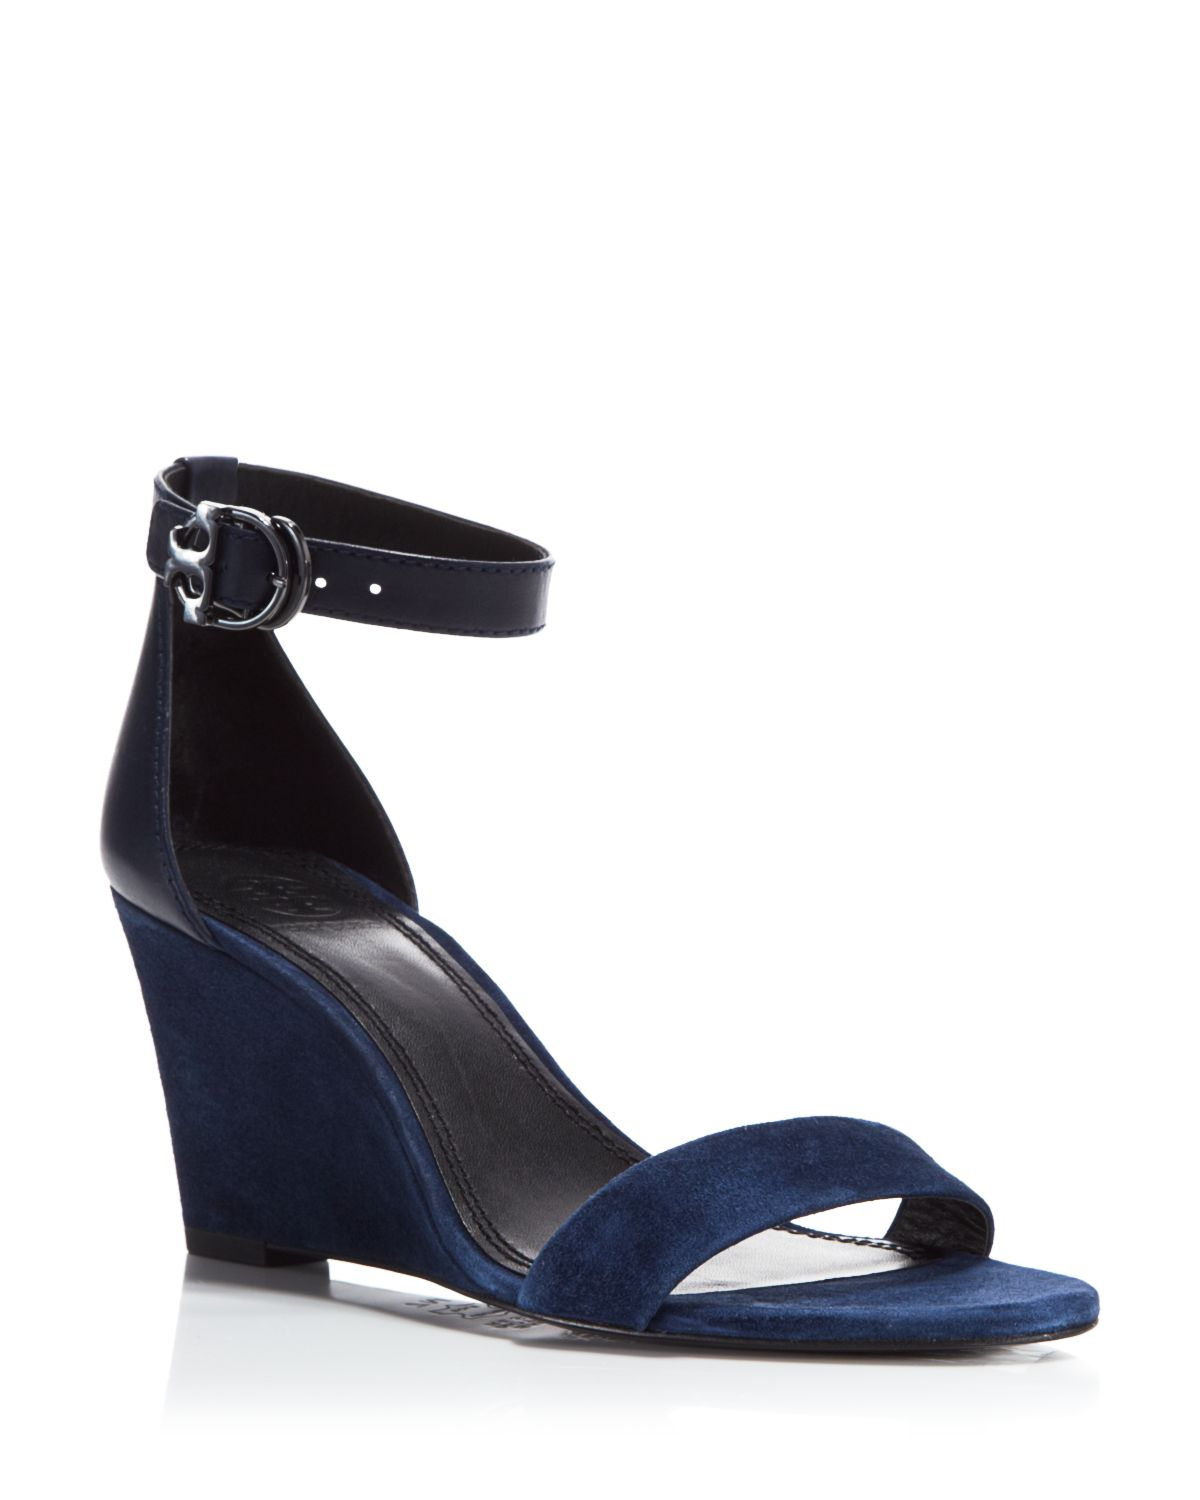 Tory Burch Ankle Strap Wedge Sandals - Grant Suede in Blue | Lyst